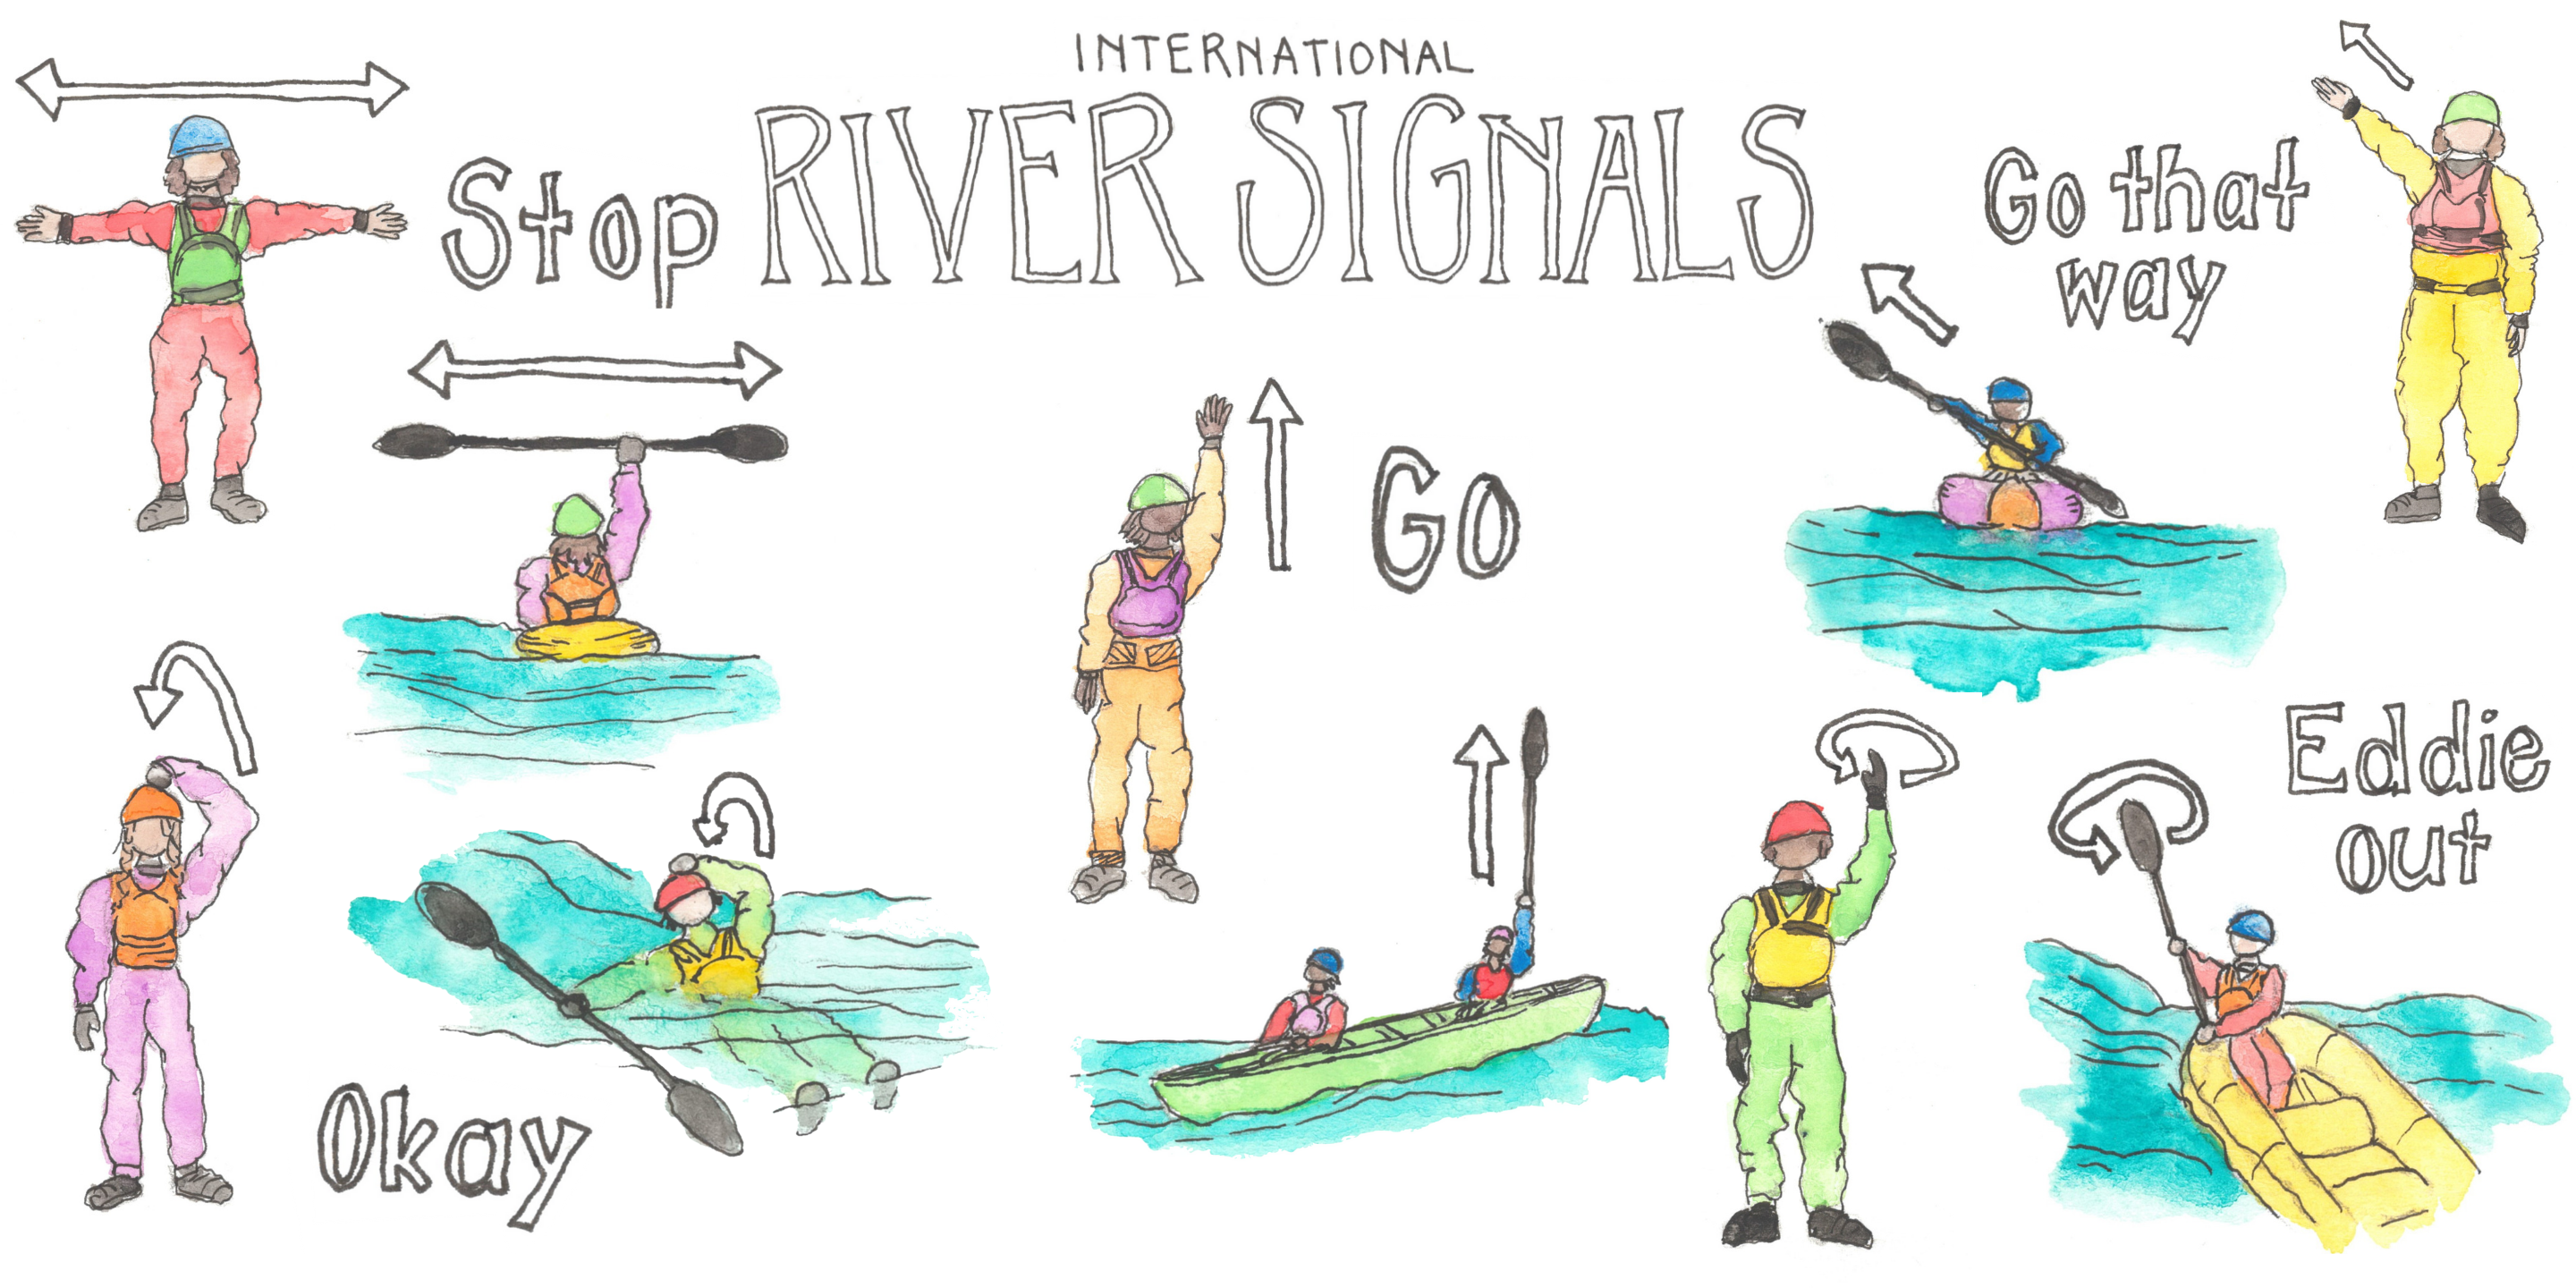 5 Need-To-Know International River Signals